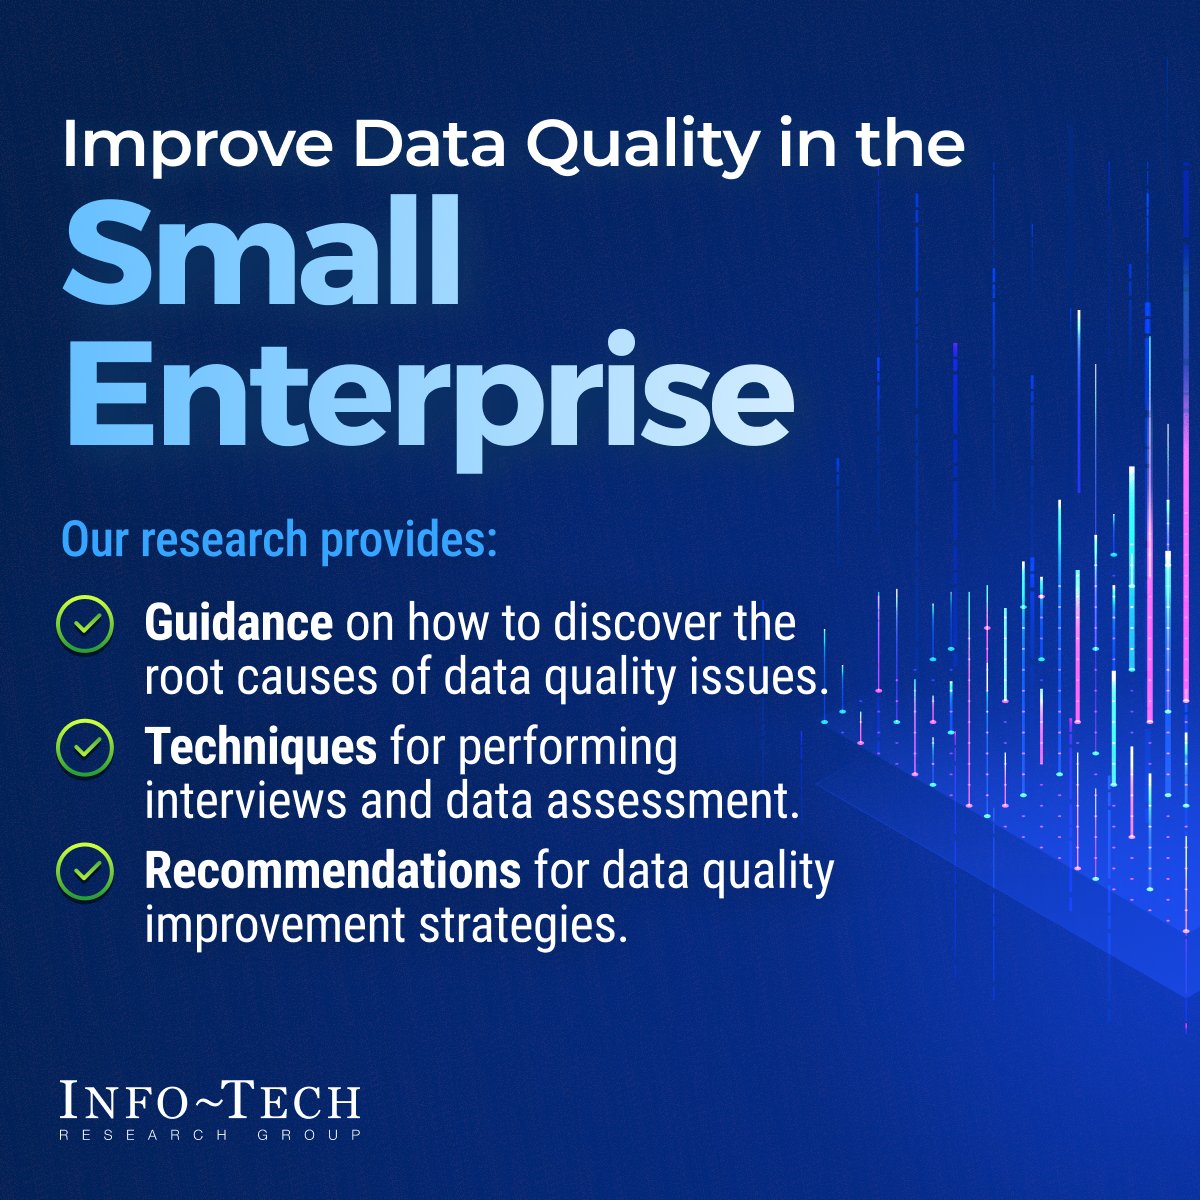 High-quality decisions rely on high-quality data. However, it can be challenging for smaller organizations to identify and address data quality issues. Download Improve Data Quality in the Small Enterprise to build your data management strategy: shorturl.at/jknqS